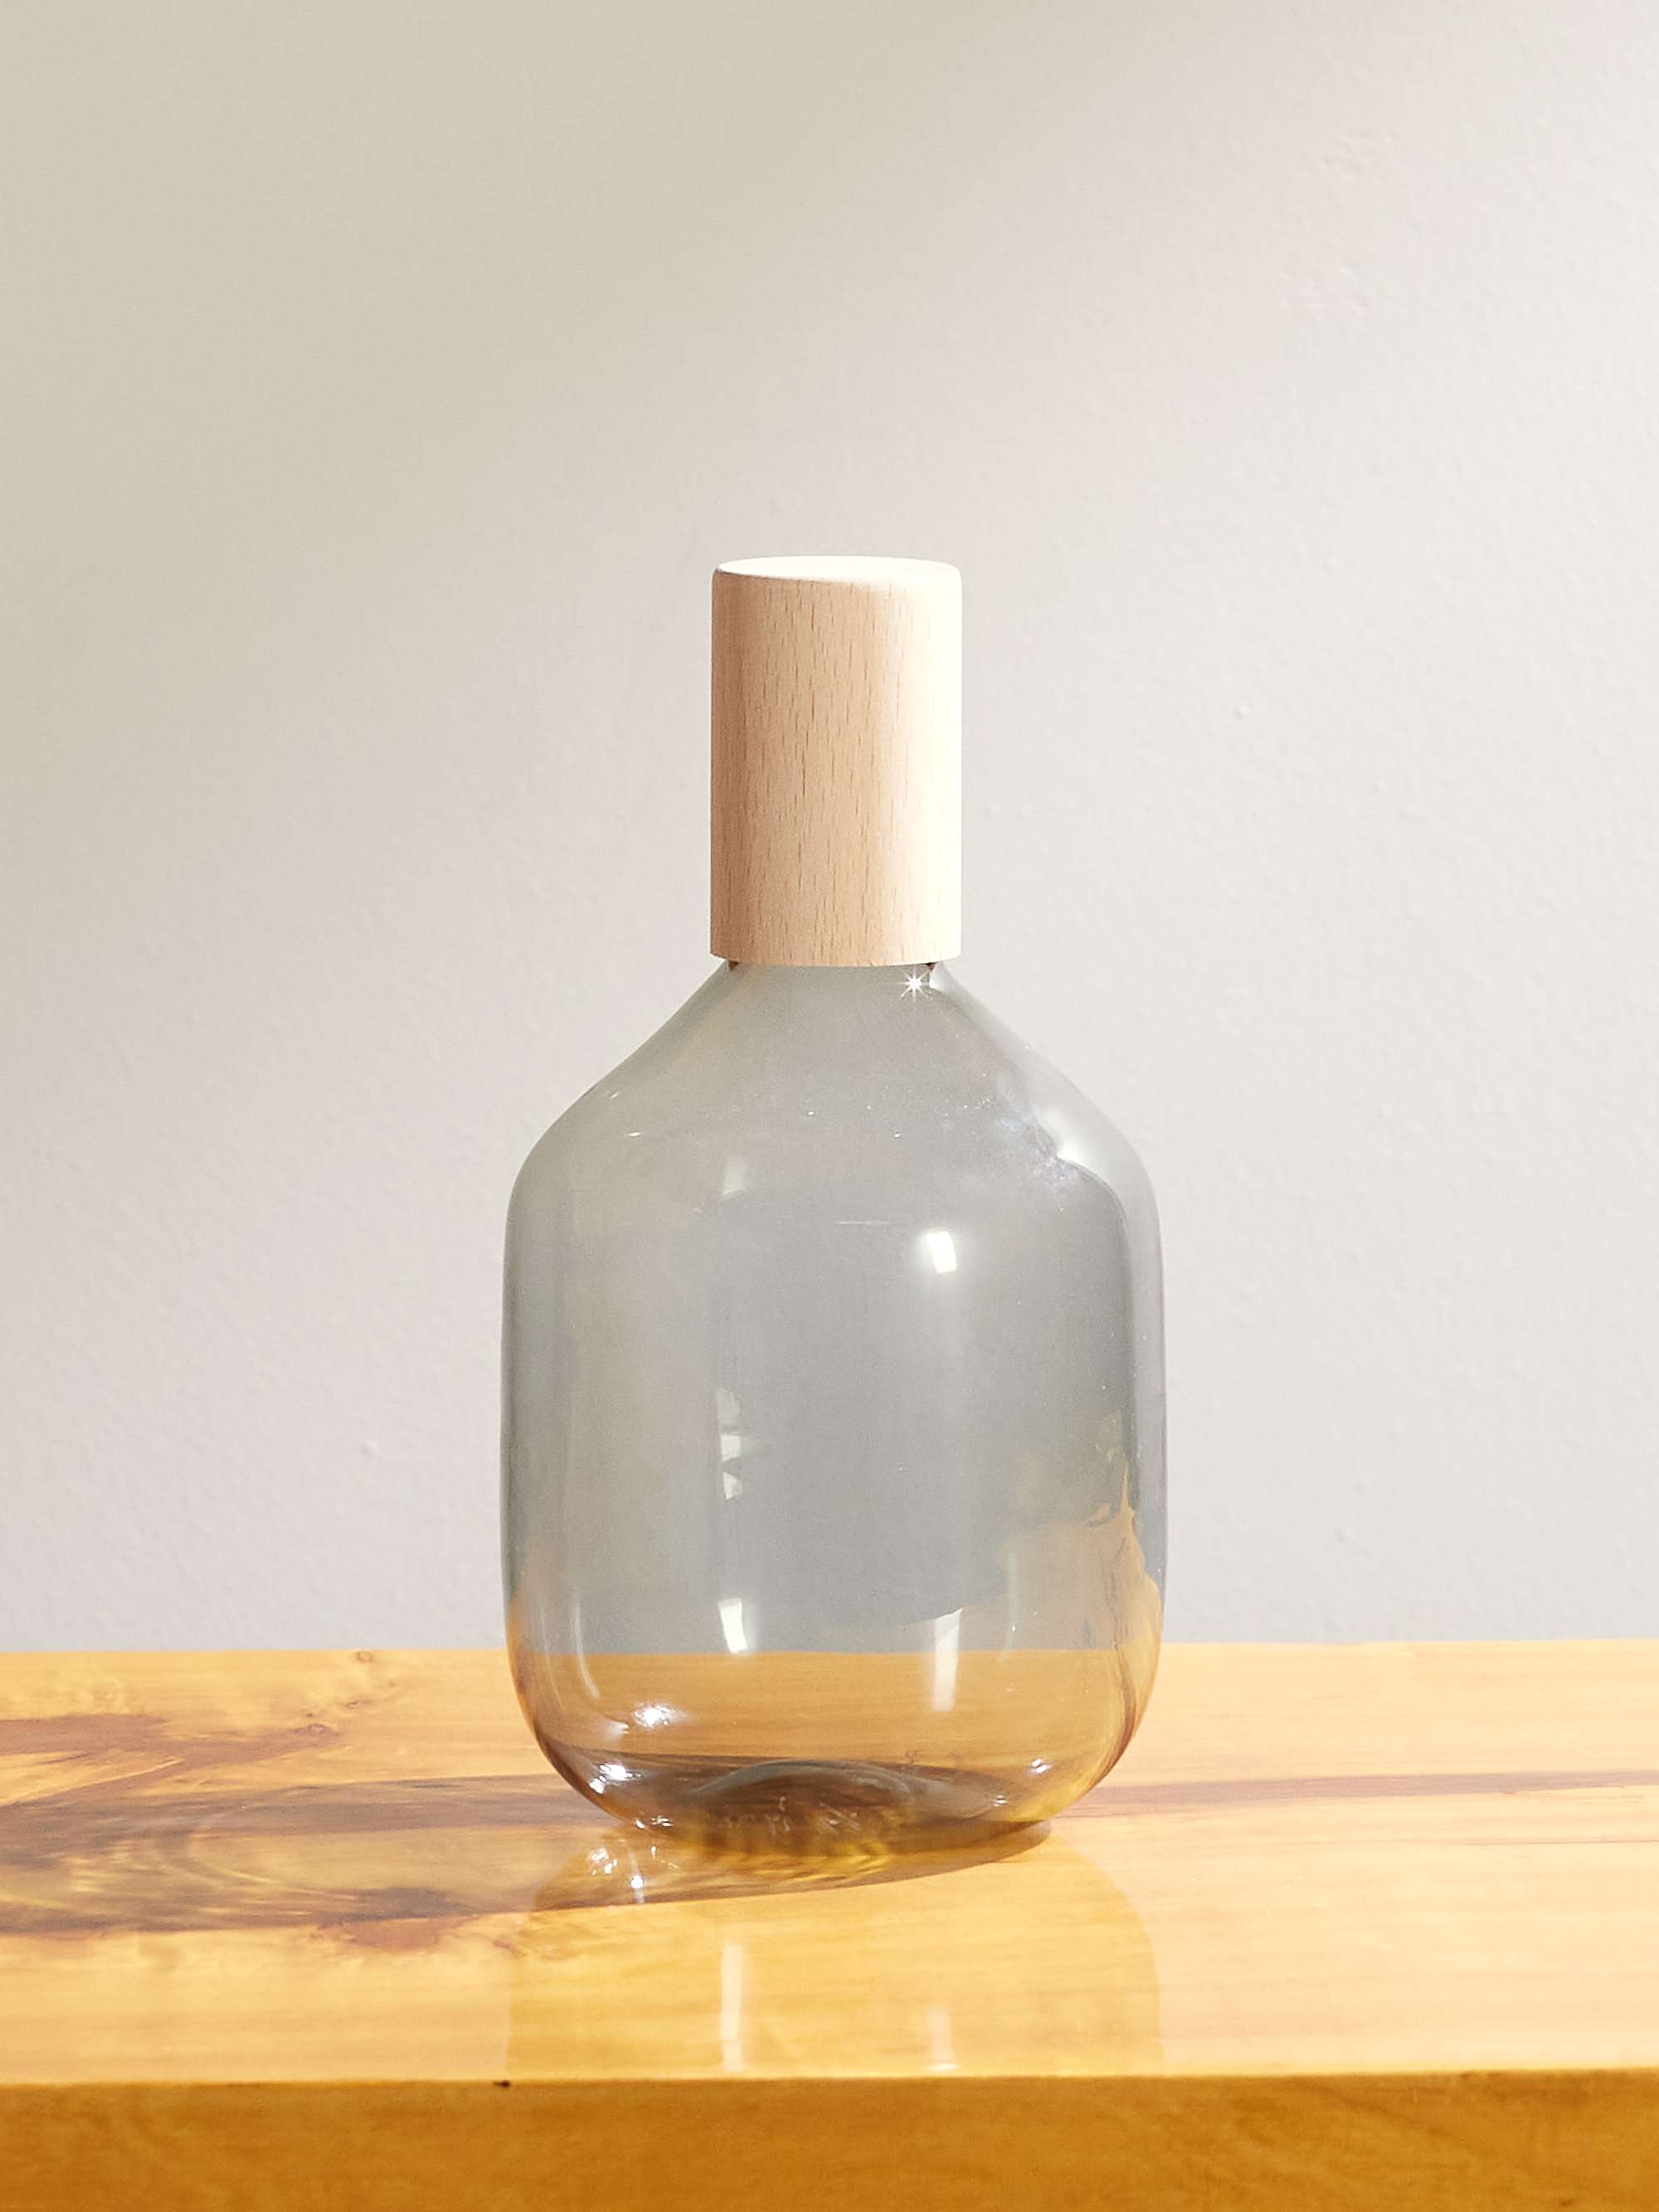 R+D.LAB Trulli Tall Glass, Wood and Cork Bottle